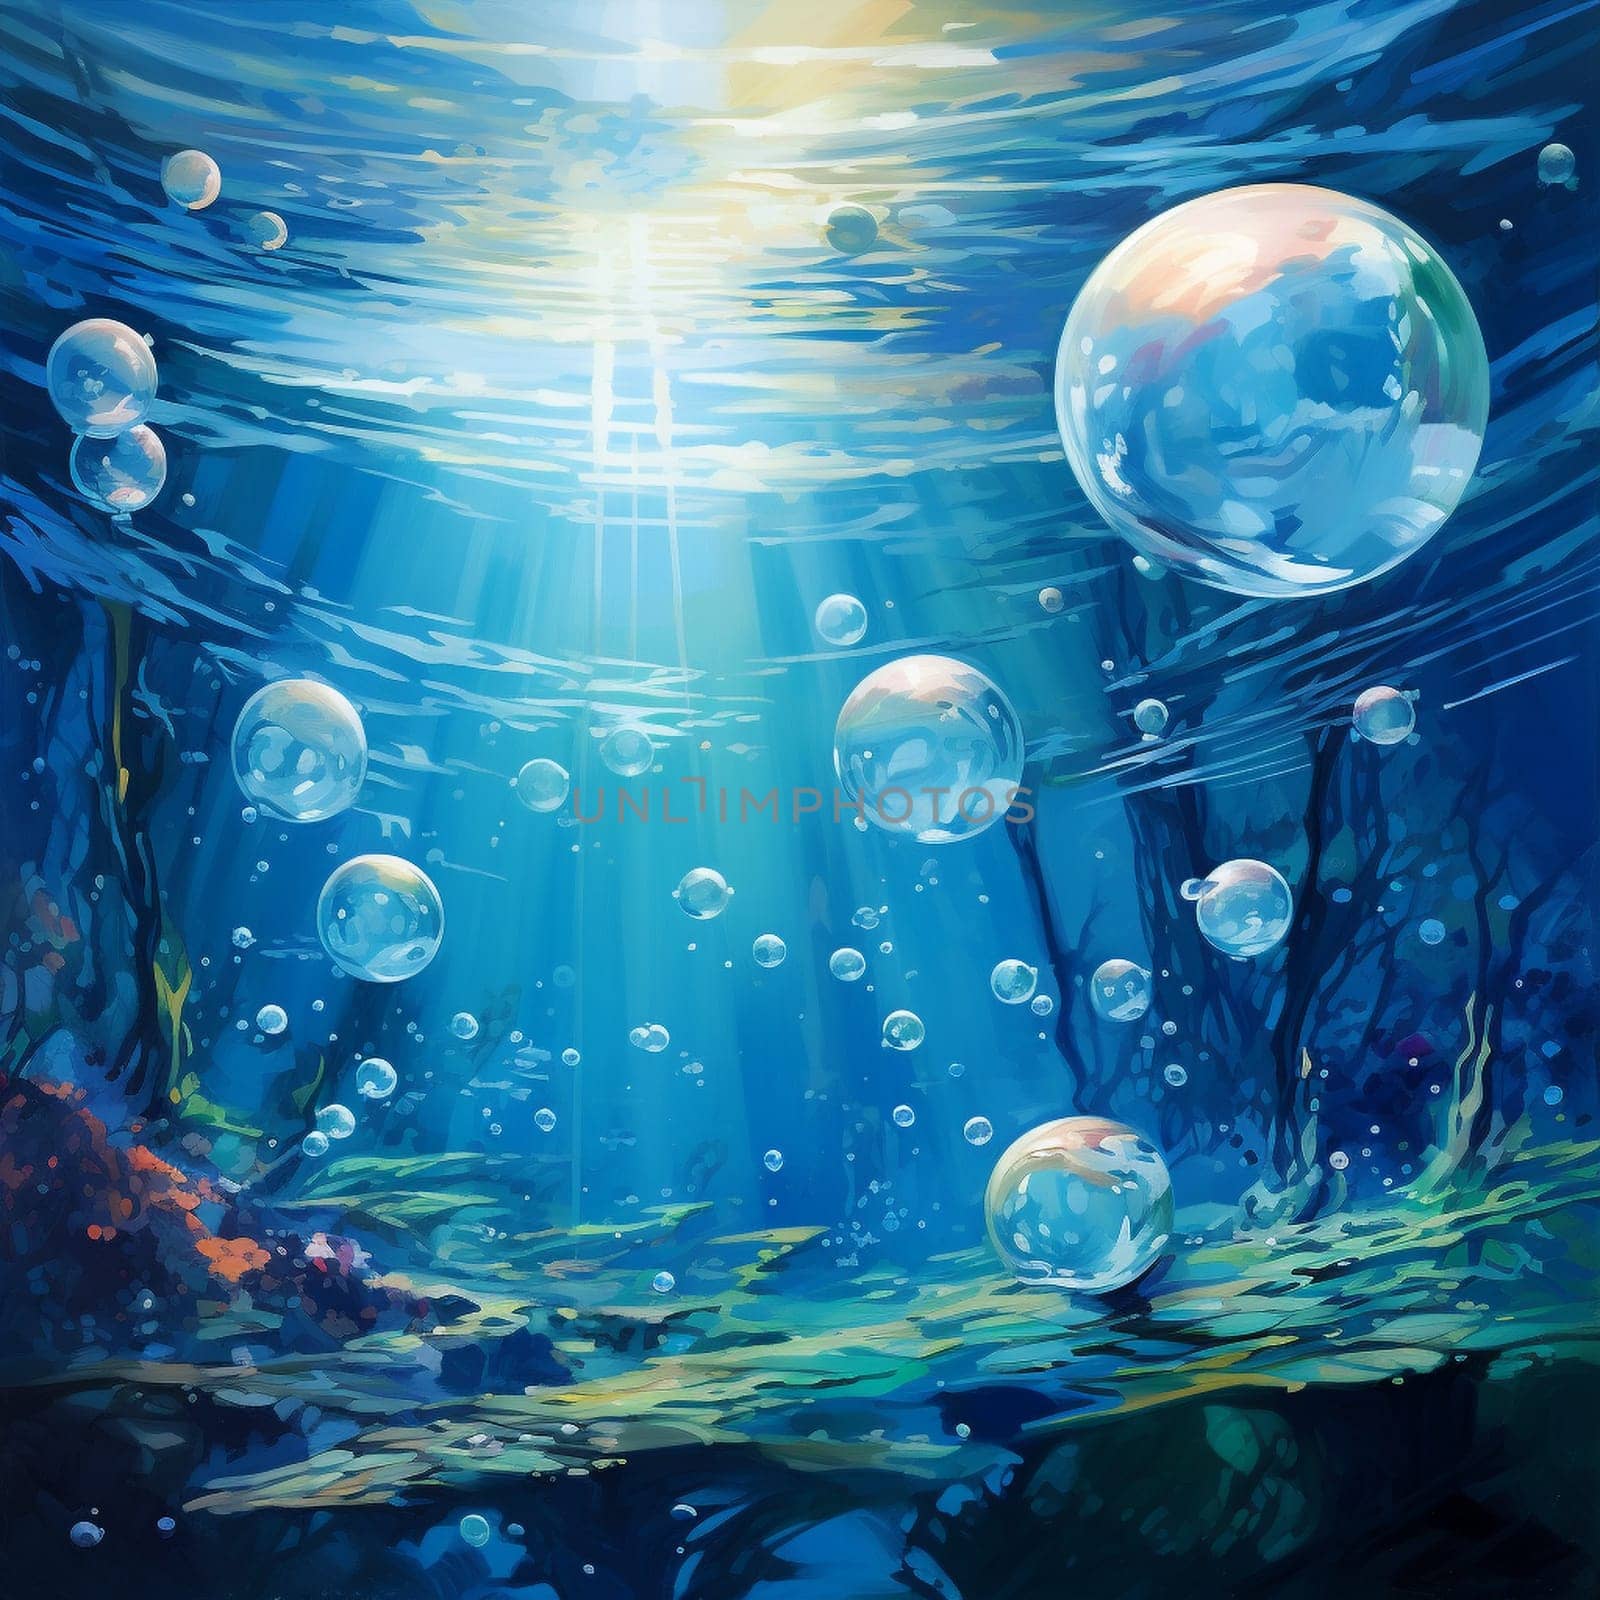 Aqua Spheres: Reflective orbs floating in a sea of shimmering blue by Sahin